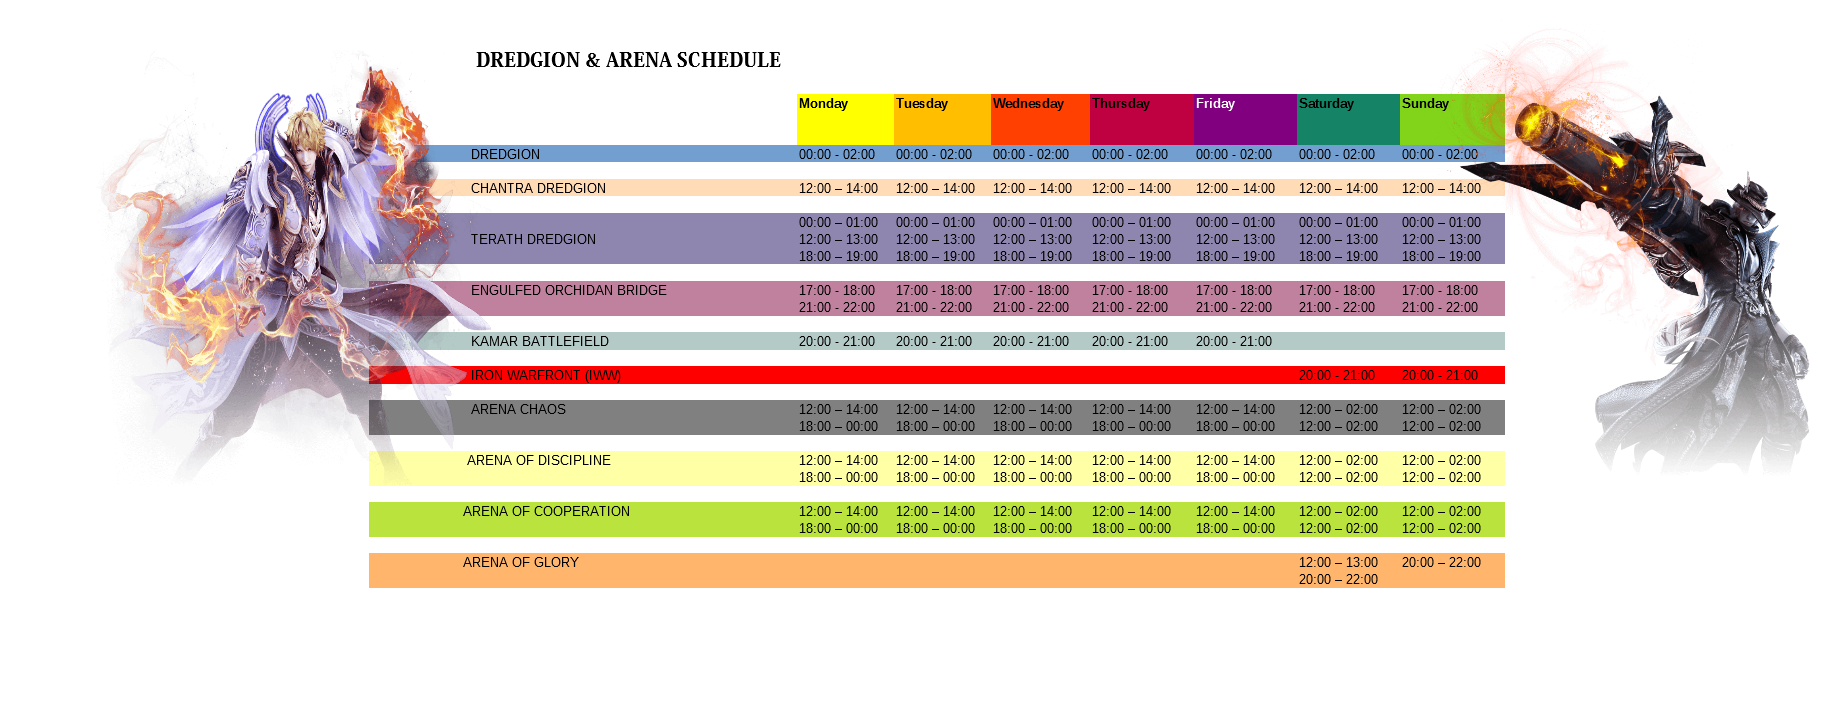 Global Aion Arena Dredgion Schedule